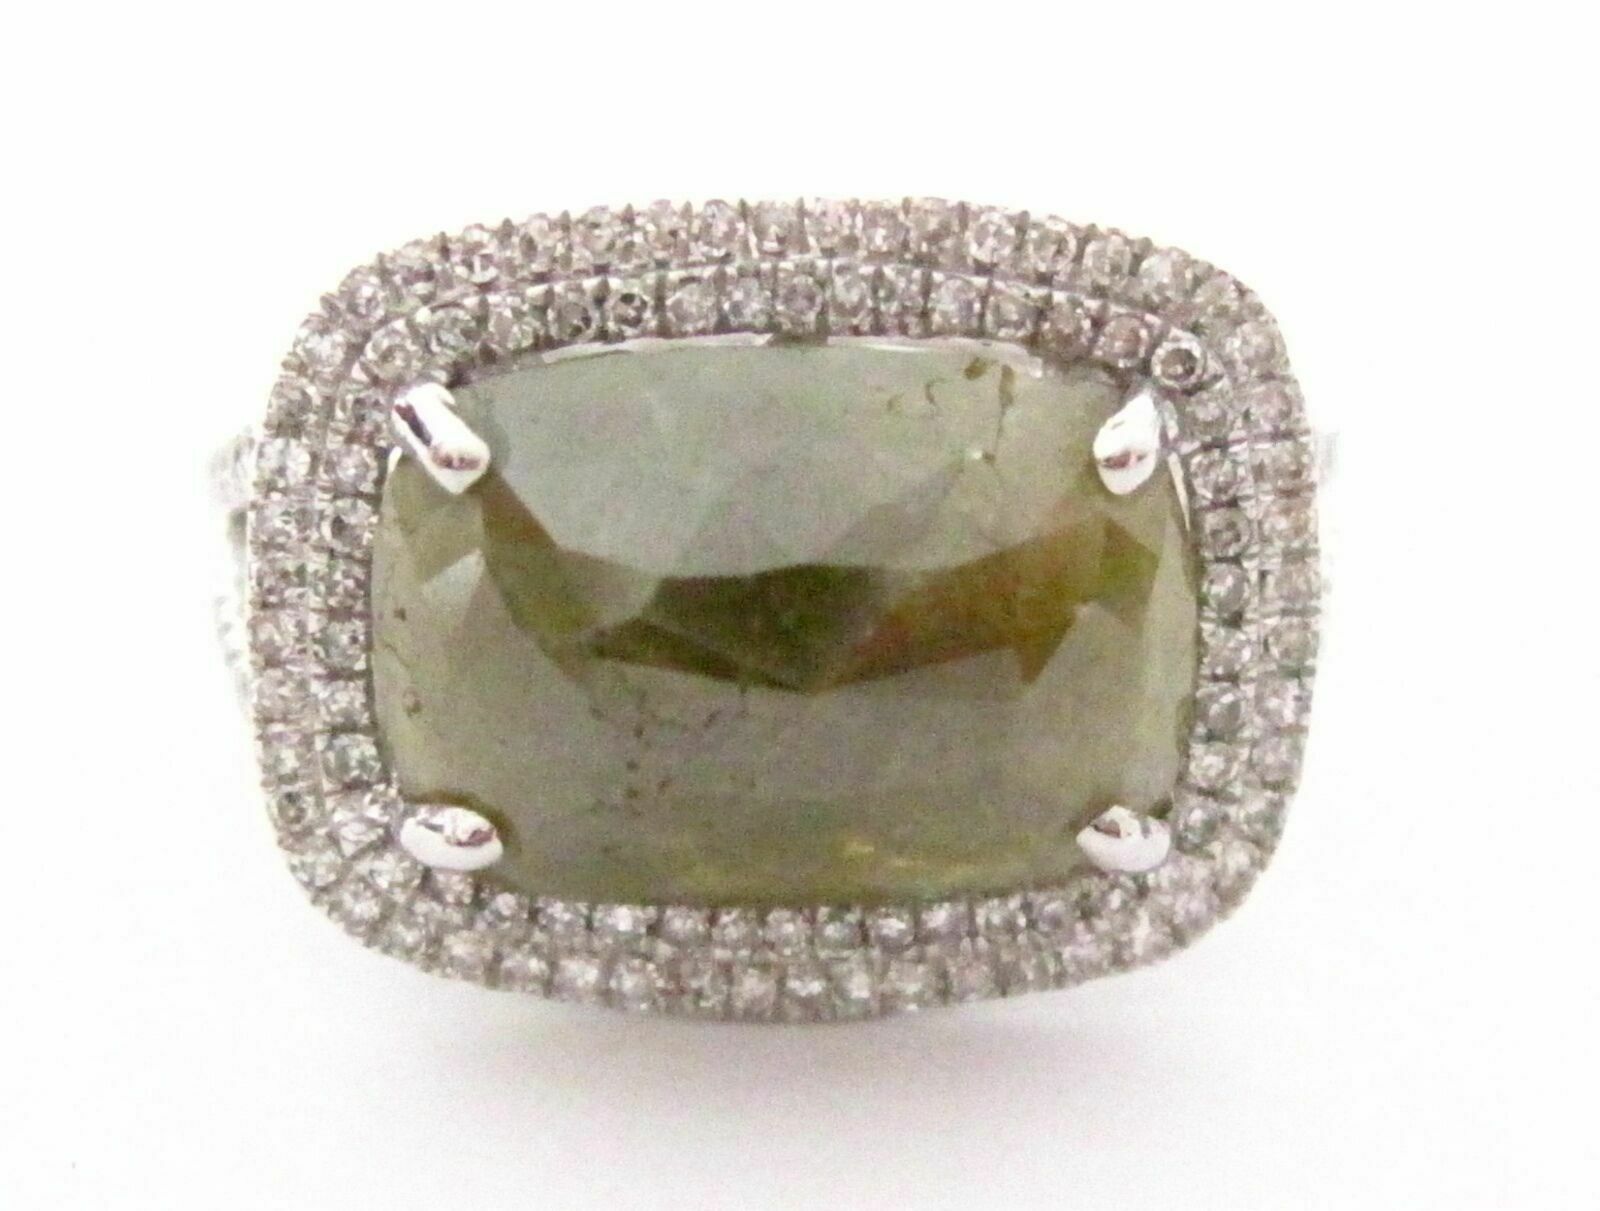 4.92 TCW Radiant Green Diamond w/ Accents Cocktail Ring Size 7 14k White Gold